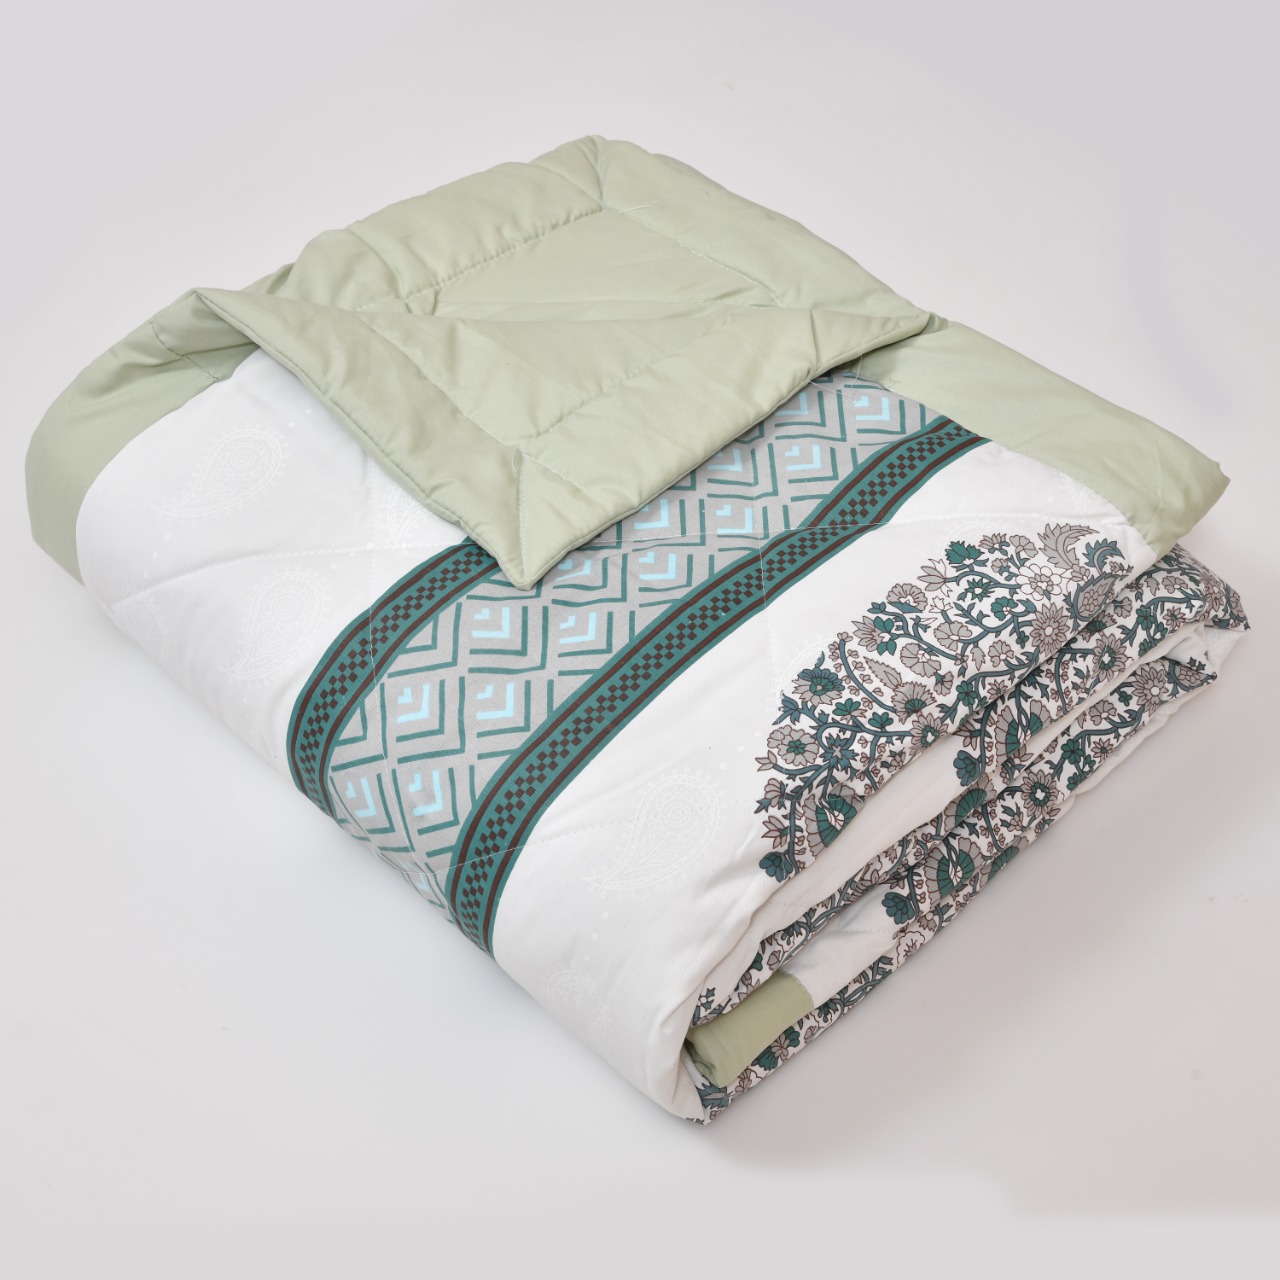 Paisley Evergreen Cotton Quilted Bedcover Comforter Blanket